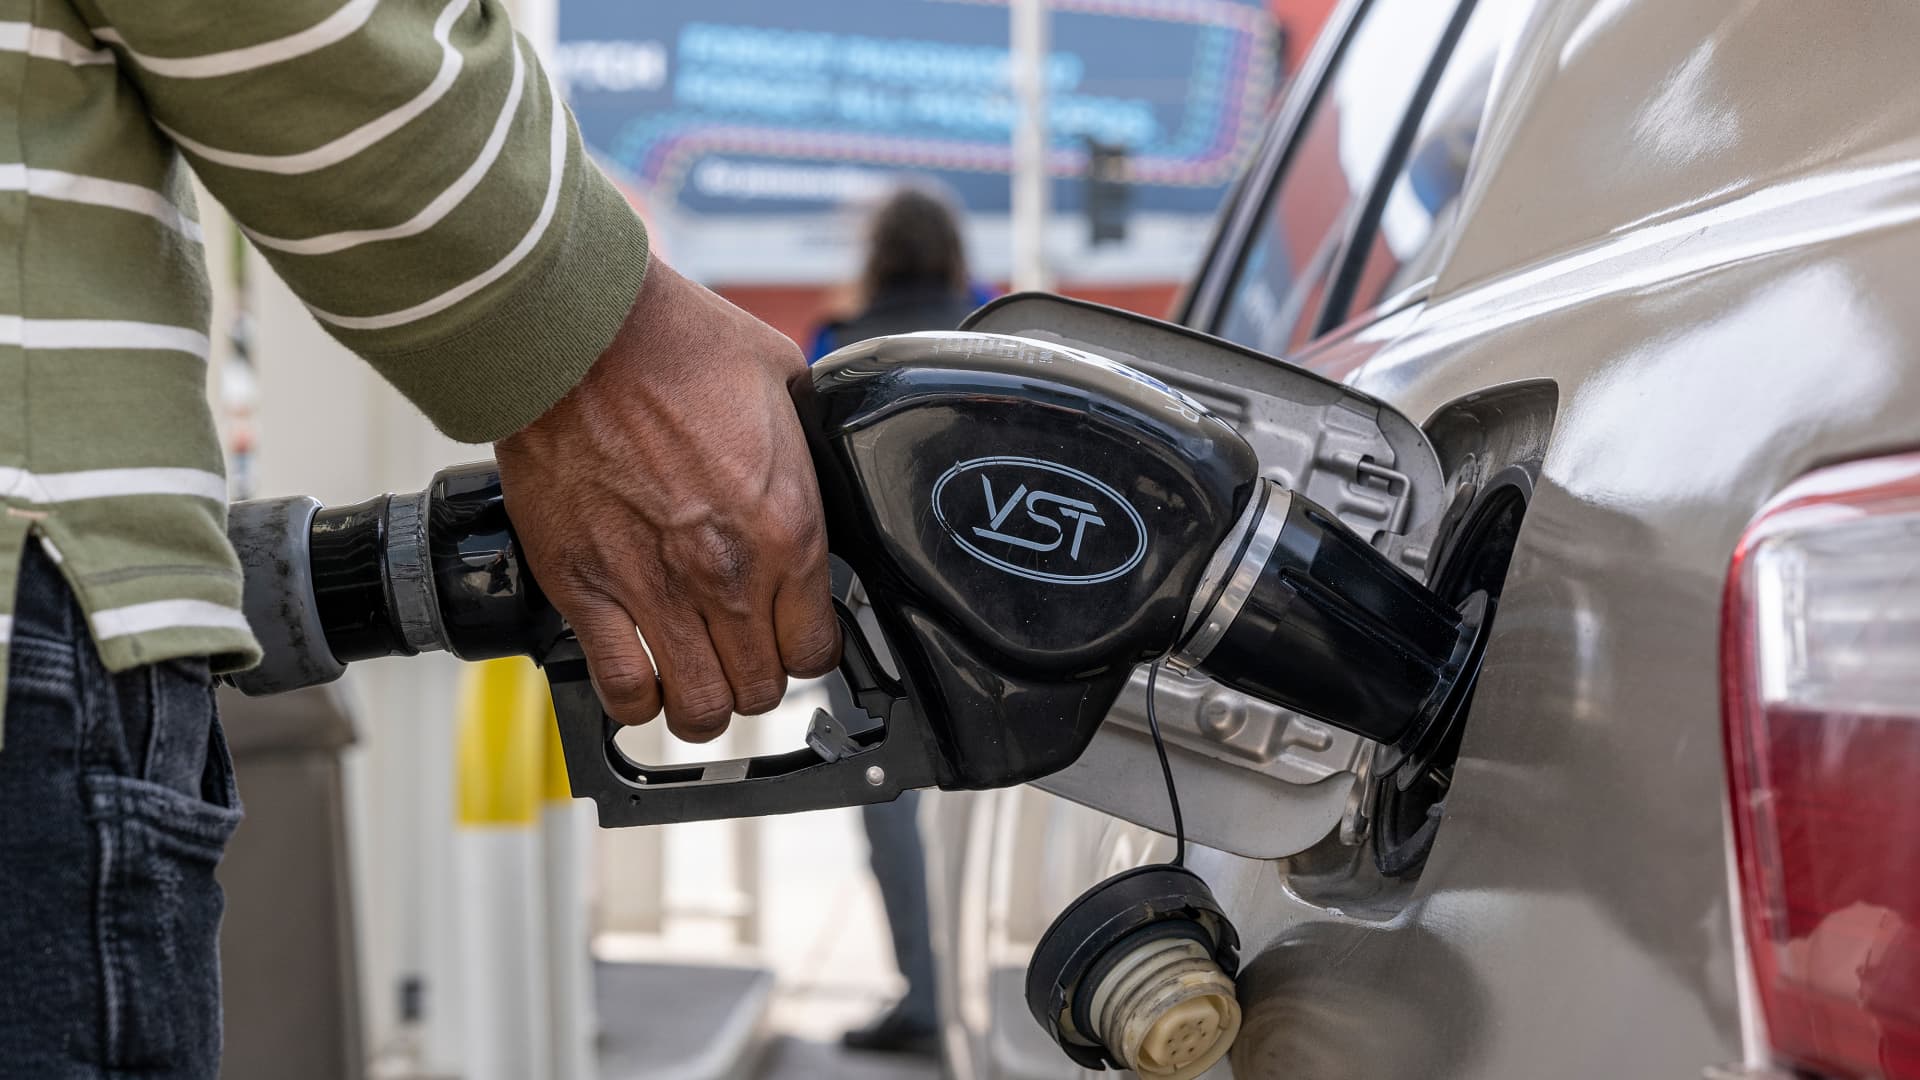 A customer holds a fuel nozzle at a gas station in San Francisco, California, U.S., on Wednesday, April 27, 2022. California is set for an automatic increase in its fuel tax July 1 after Governors Gavin Newsom failed to convince lawmakers to pause the hike, part of his plan to bring relief to residents in the state with the most expensive gasoline.